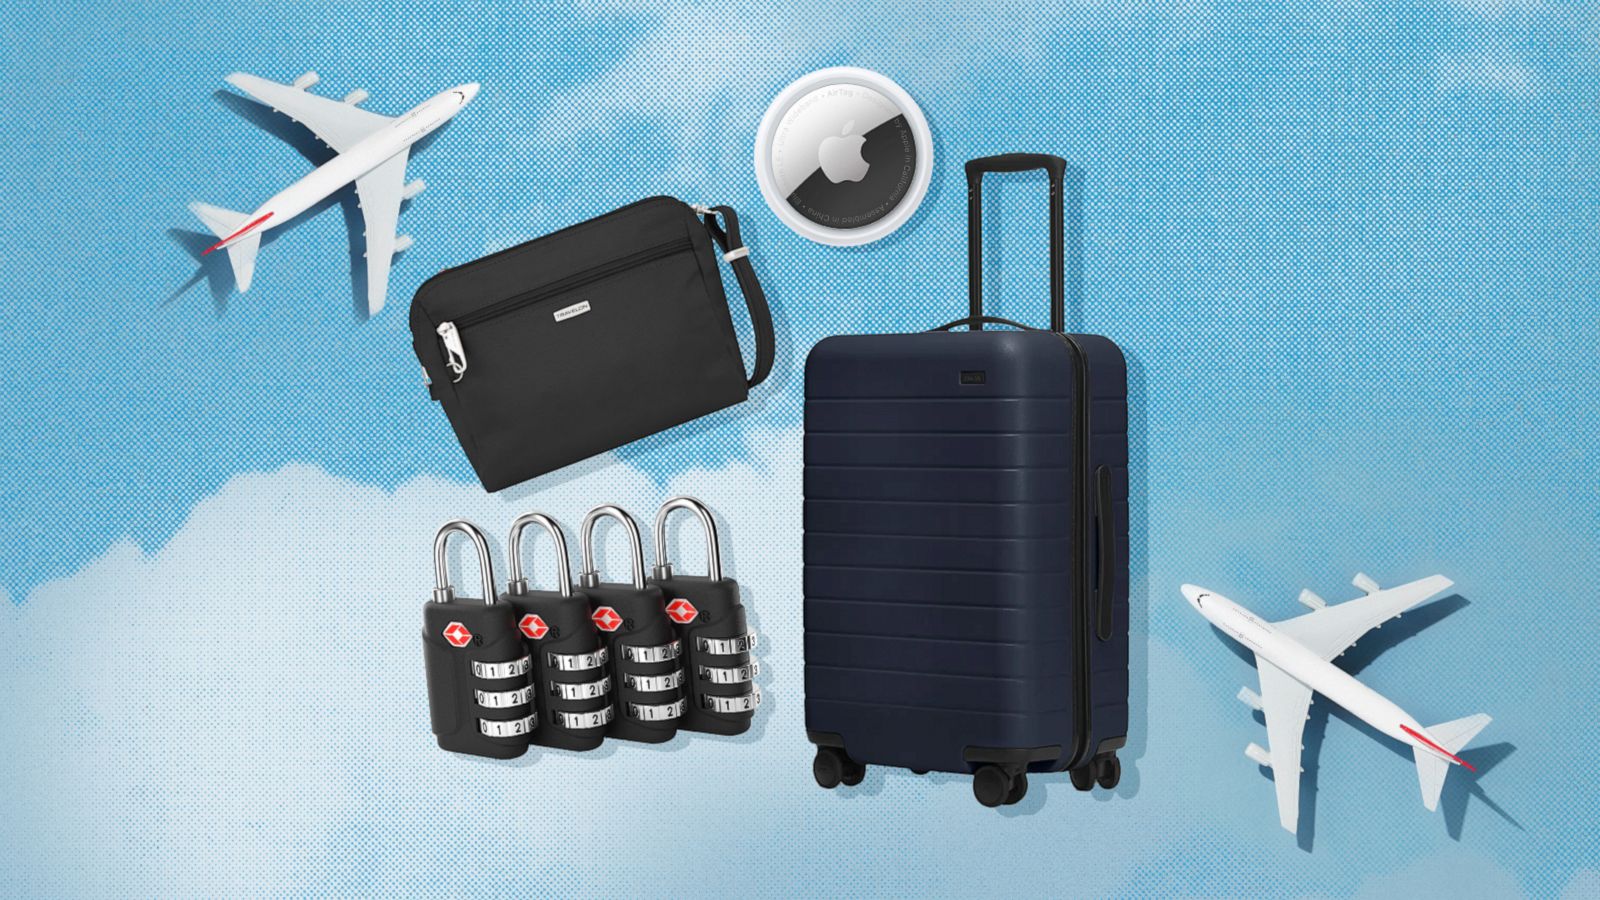 The Right Stuff: Shop the best travel essentials - Good Morning America